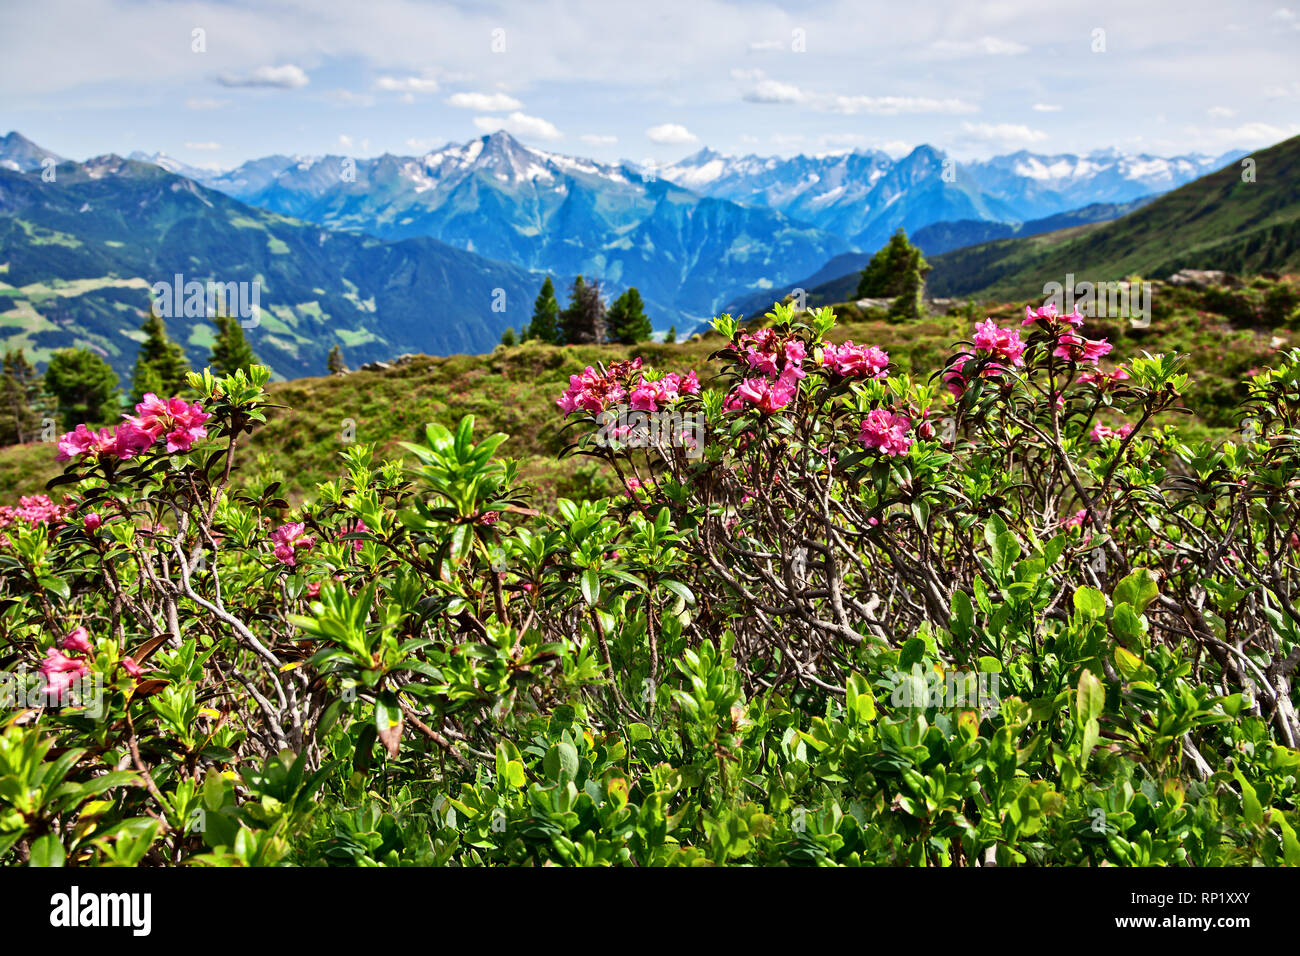 Mountain landscape with Alpine Roses in the foreground. Zillertal Valley, Zillertal Alpine Road, Austria, Tyrol. Stock Photo